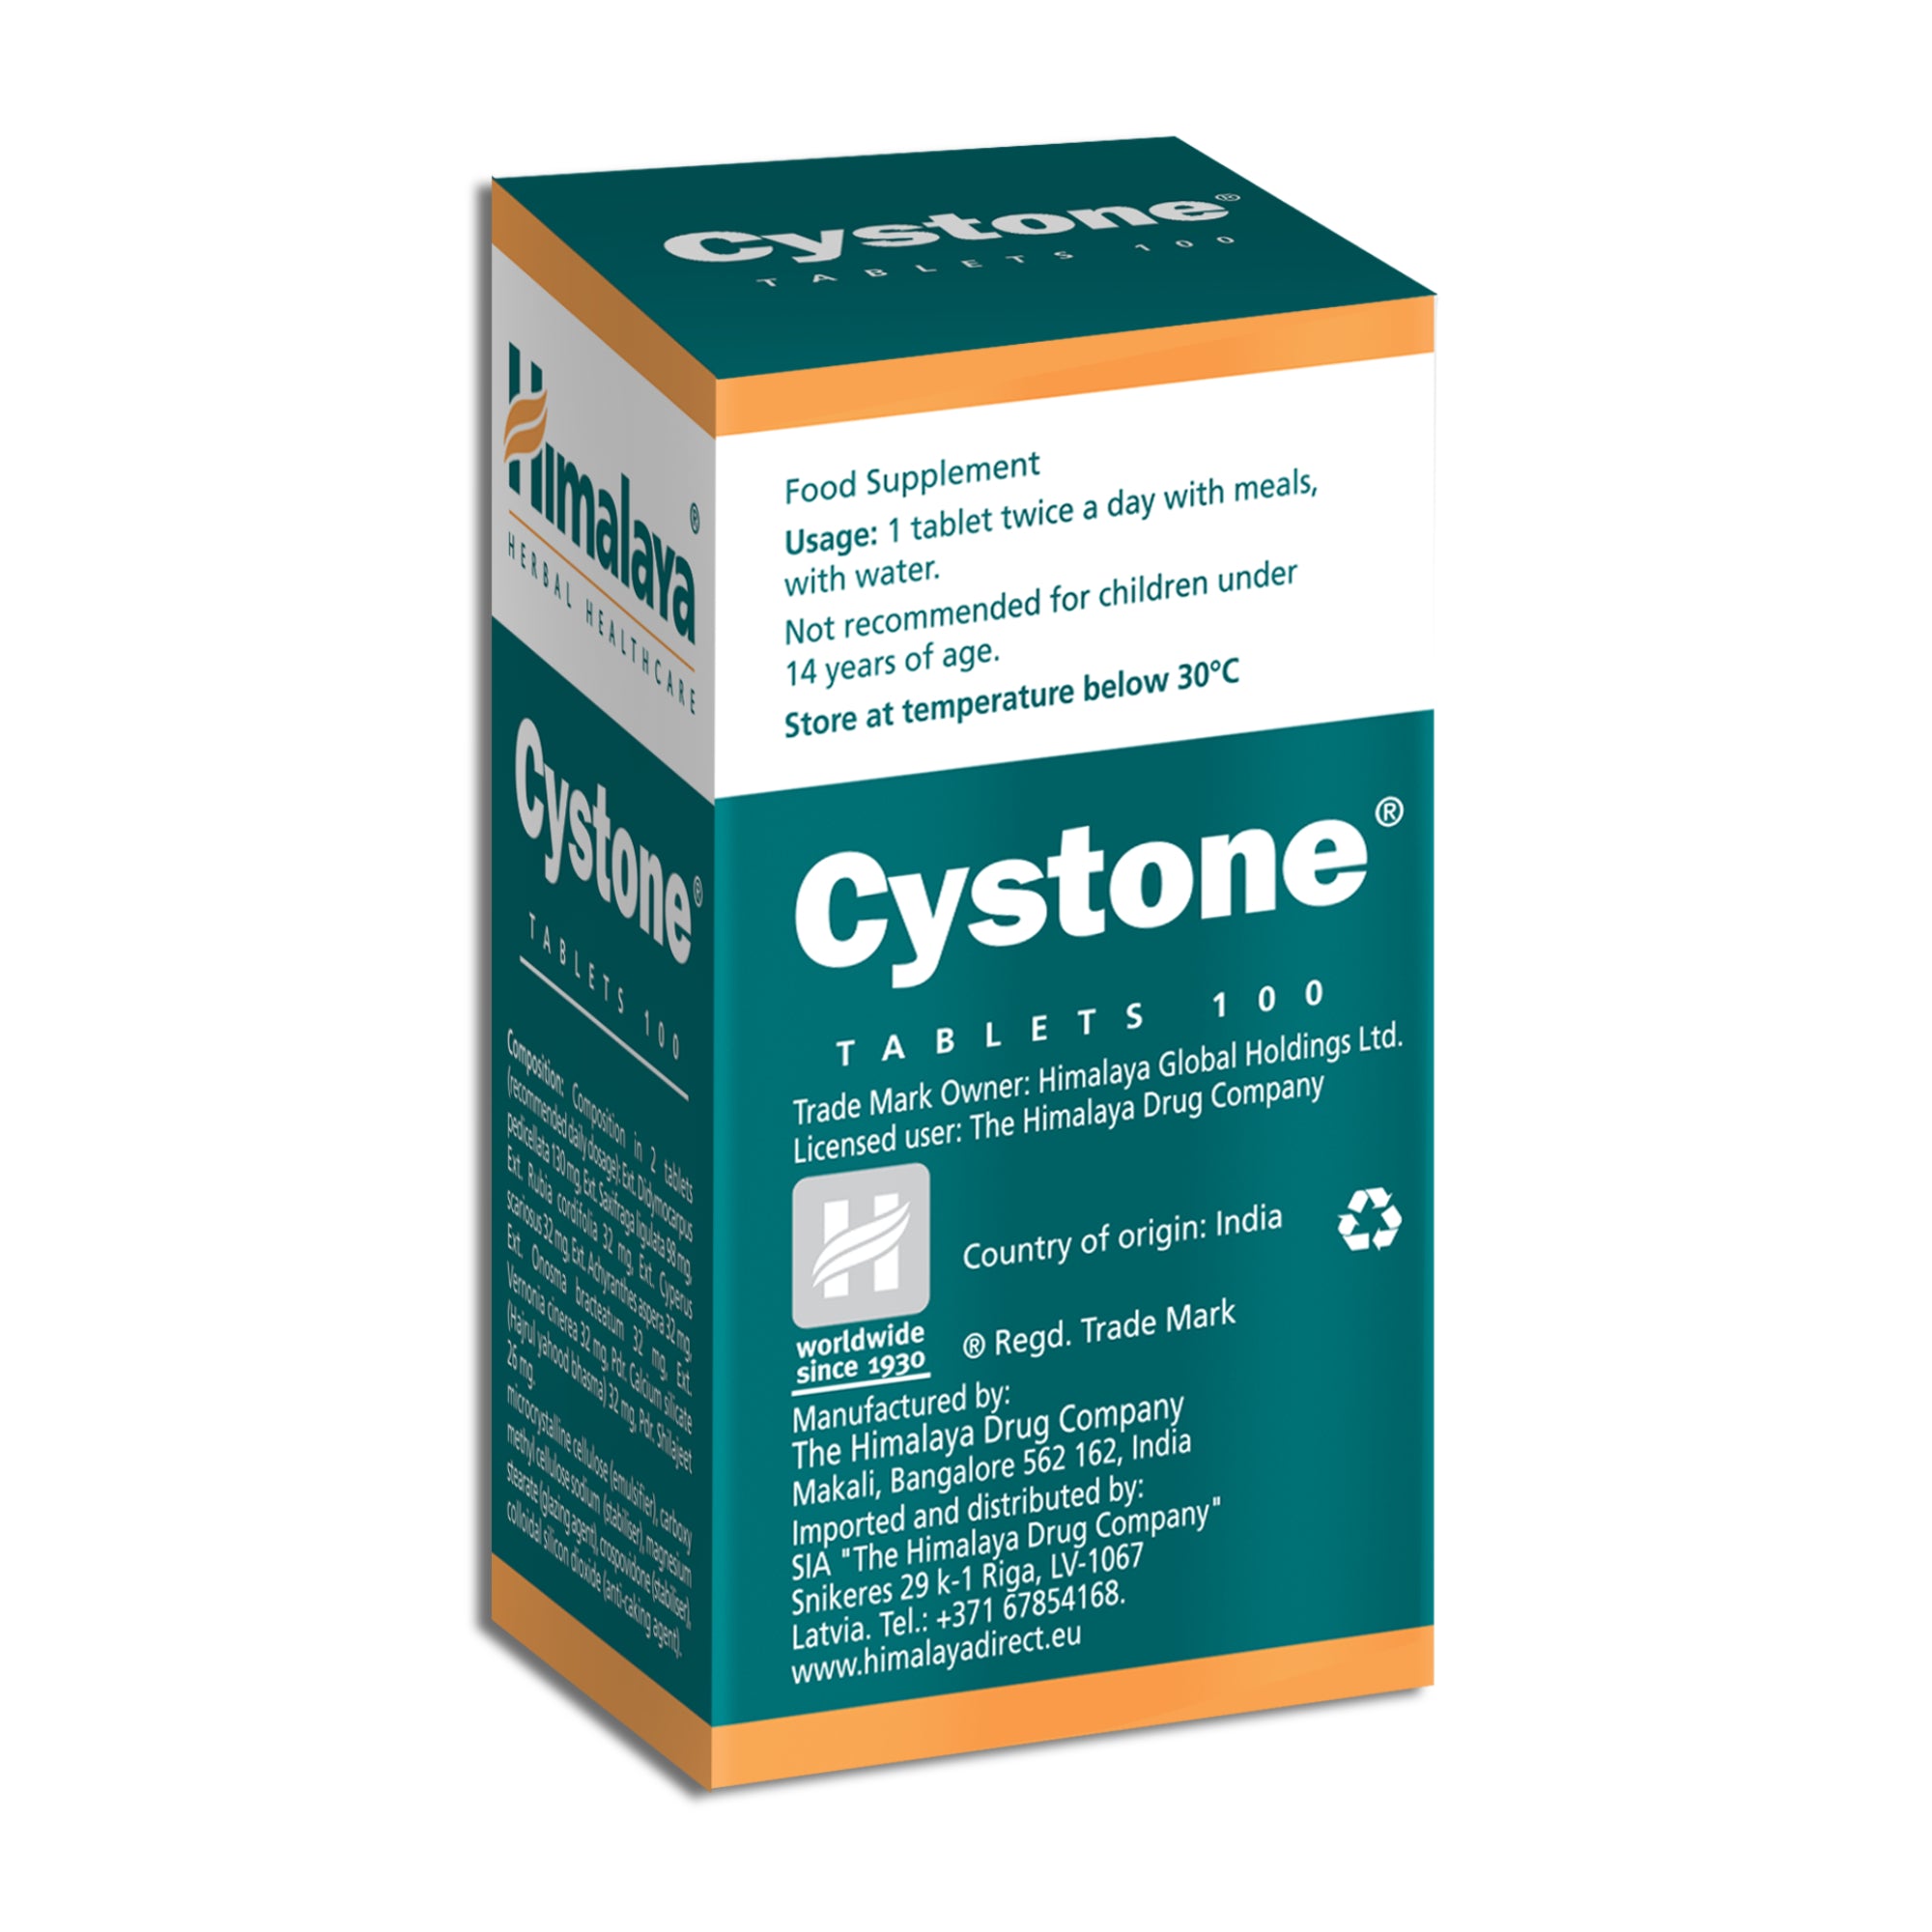 Himalaya Cystone - 100 Tablets (Pack of 3)